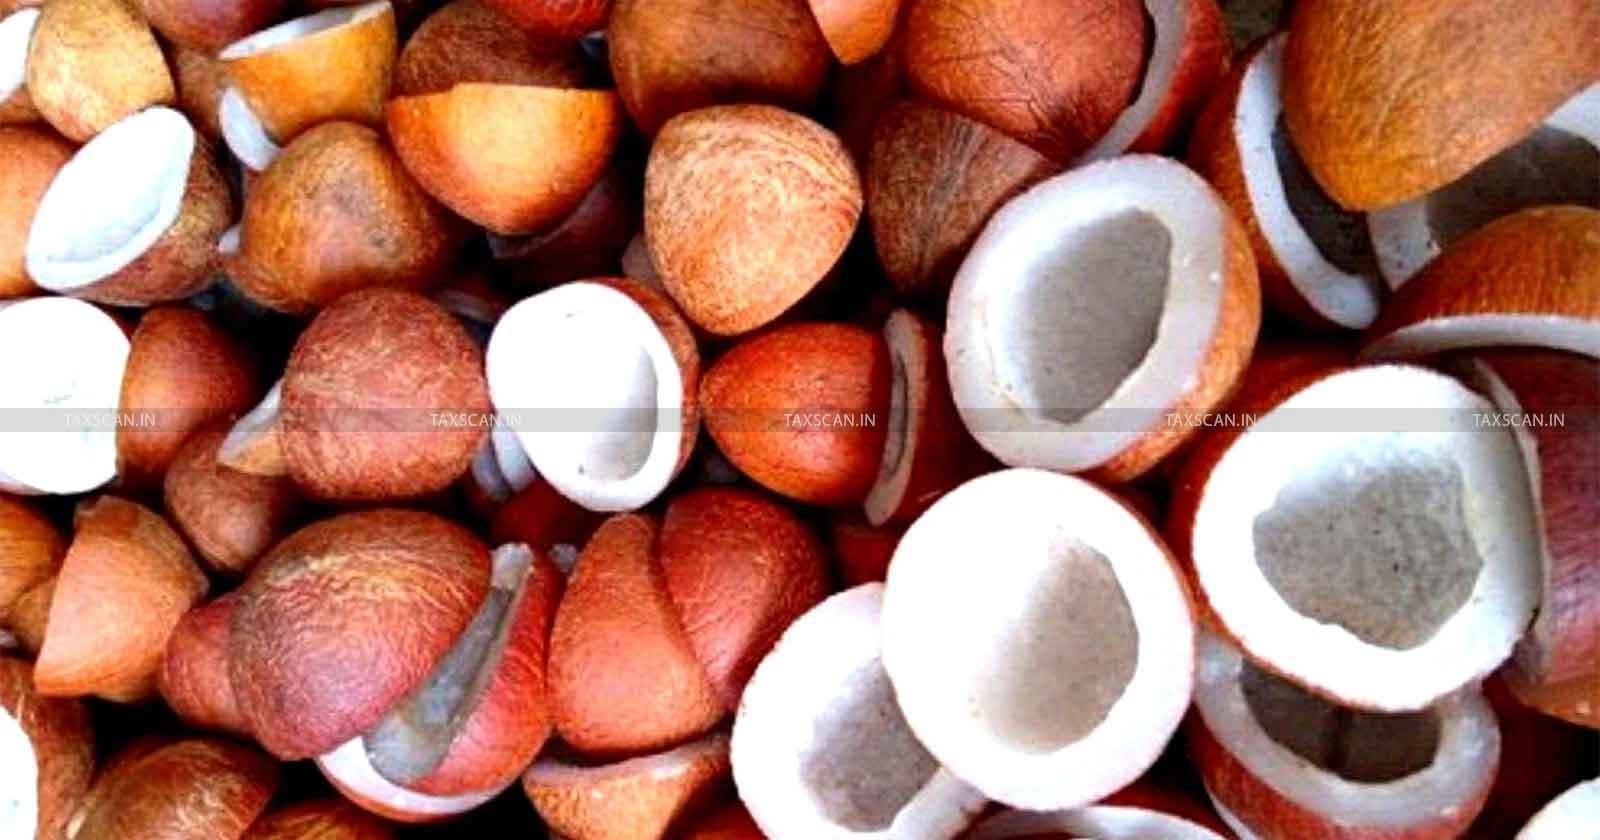 GST - Supply of Dried Coconut - EMS COCO - Dried Coconut - AAR - Dried Coconut by EMS COCO - taxscan